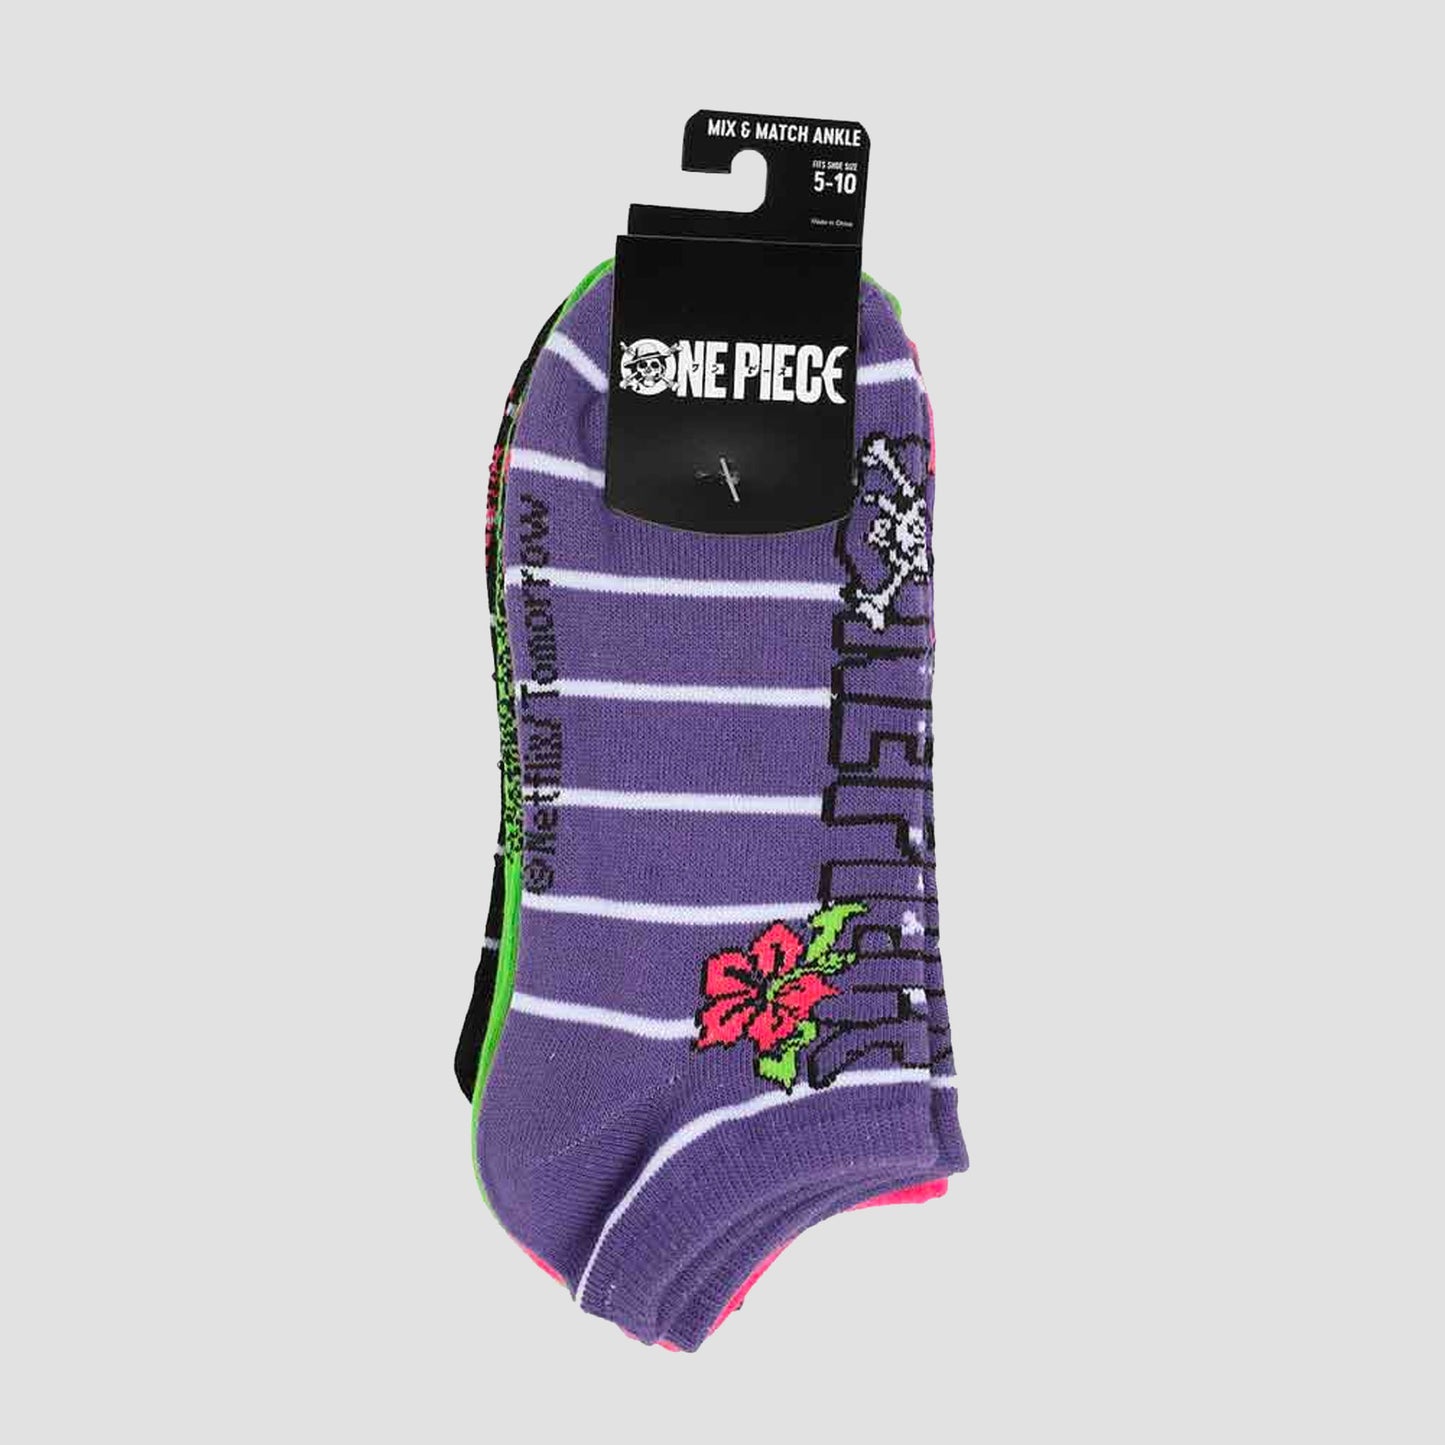 One Piece Mix & Match 5-Pack Set Women's Ankle Socks